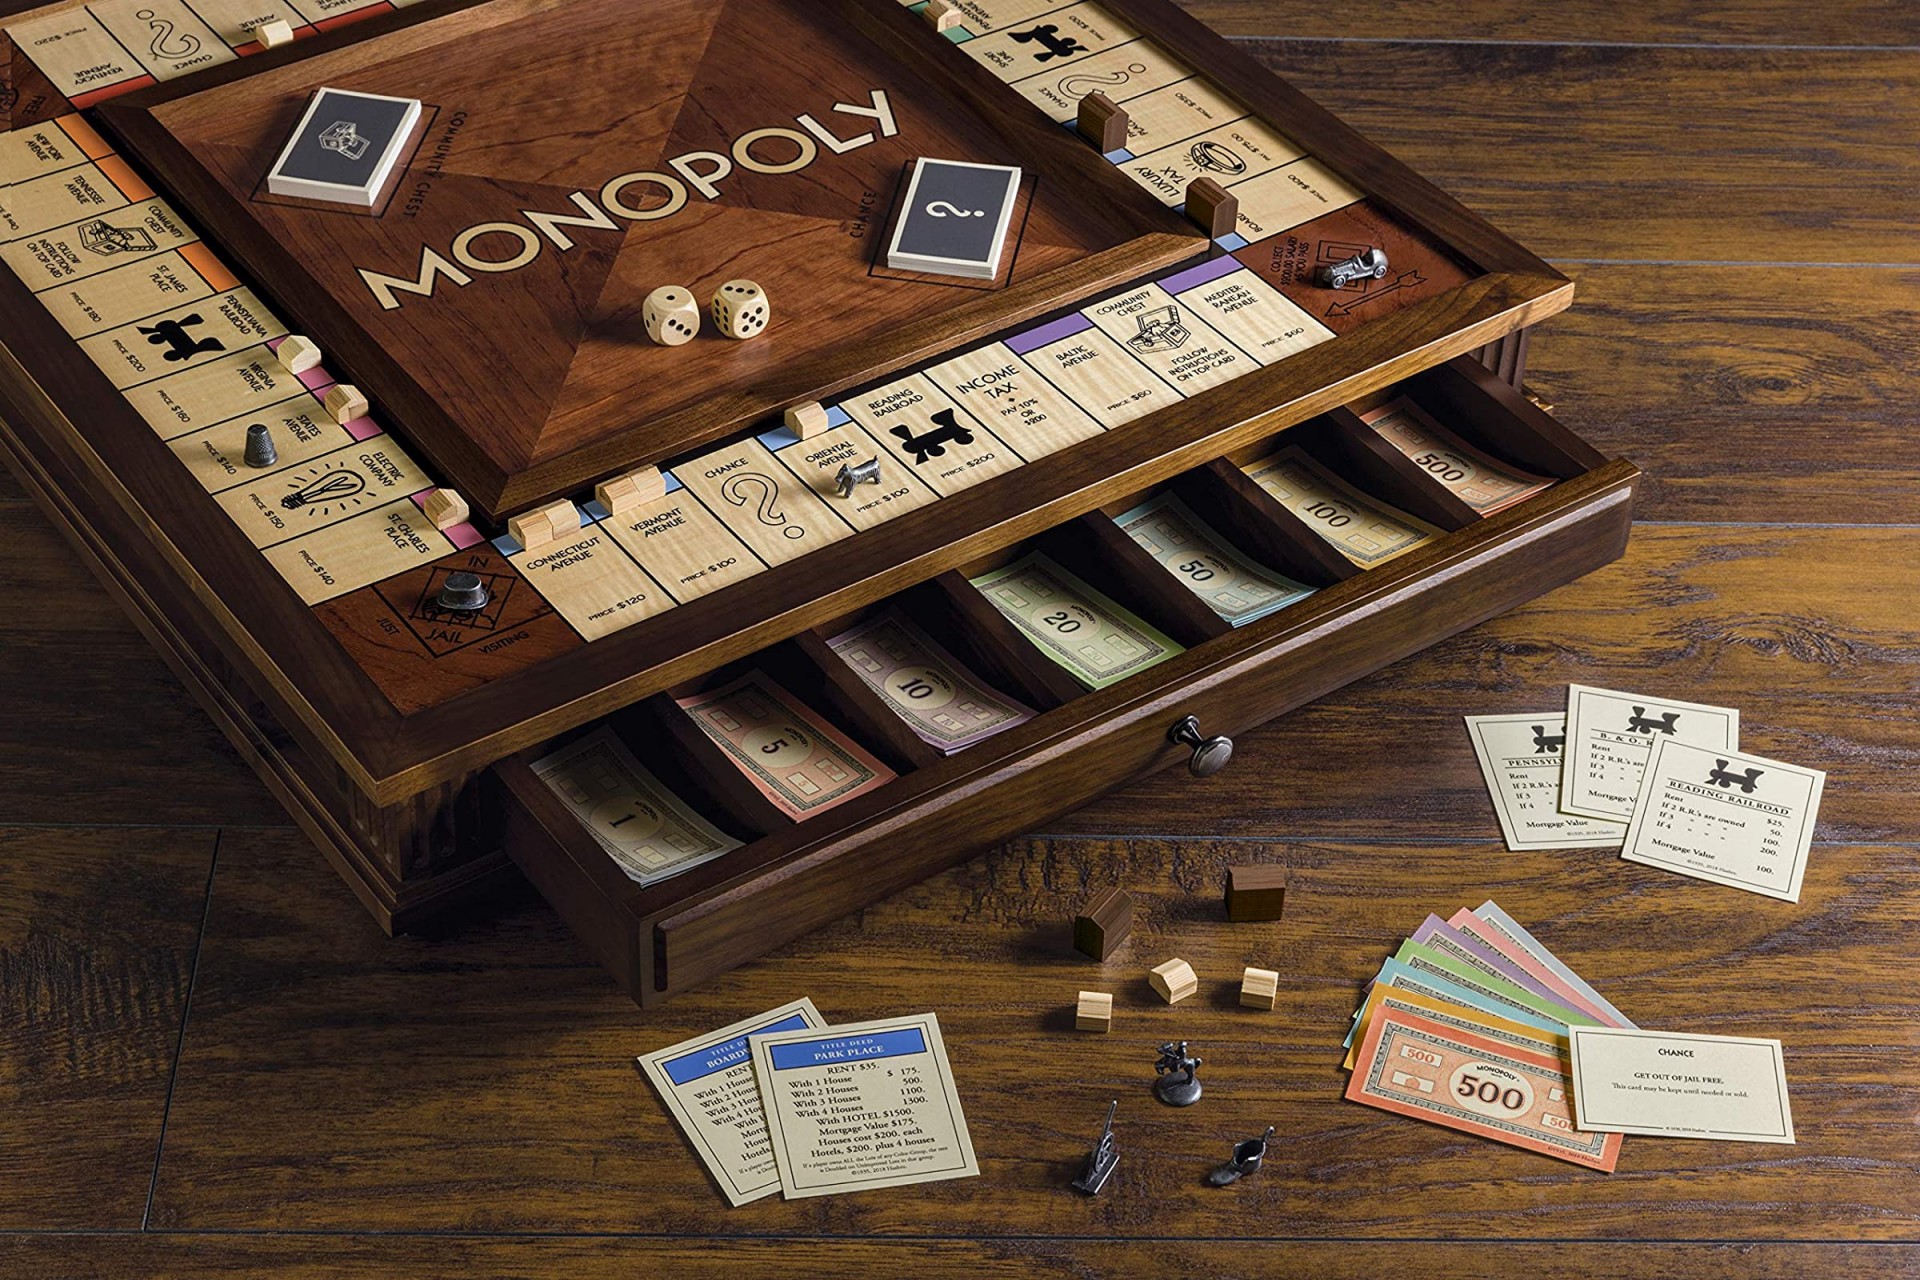 scrabble-and-monopoly-heirloom-edition-by-ws-game-company-storage-drawer